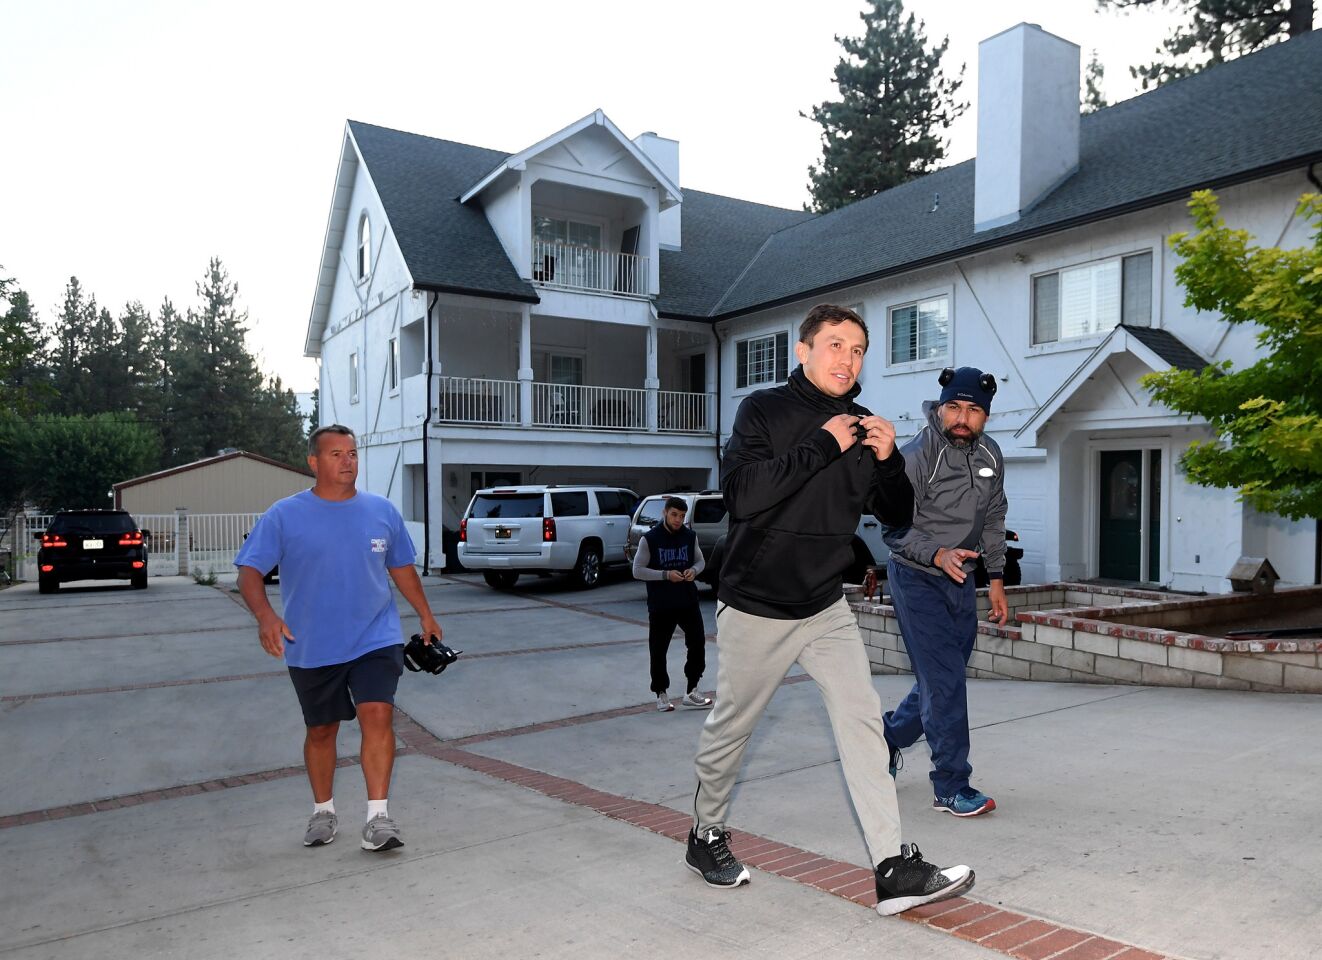 BIG BEAR LAKE, CA - AUGUST 09: Gennady Golovkin prepares for a morning run at The Summitt on August 9, 2018 in Big Bear Lake, California. (Photo by Harry How/Getty Images) ** OUTS - ELSENT, FPG, CM - OUTS * NM, PH, VA if sourced by CT, LA or MoD **